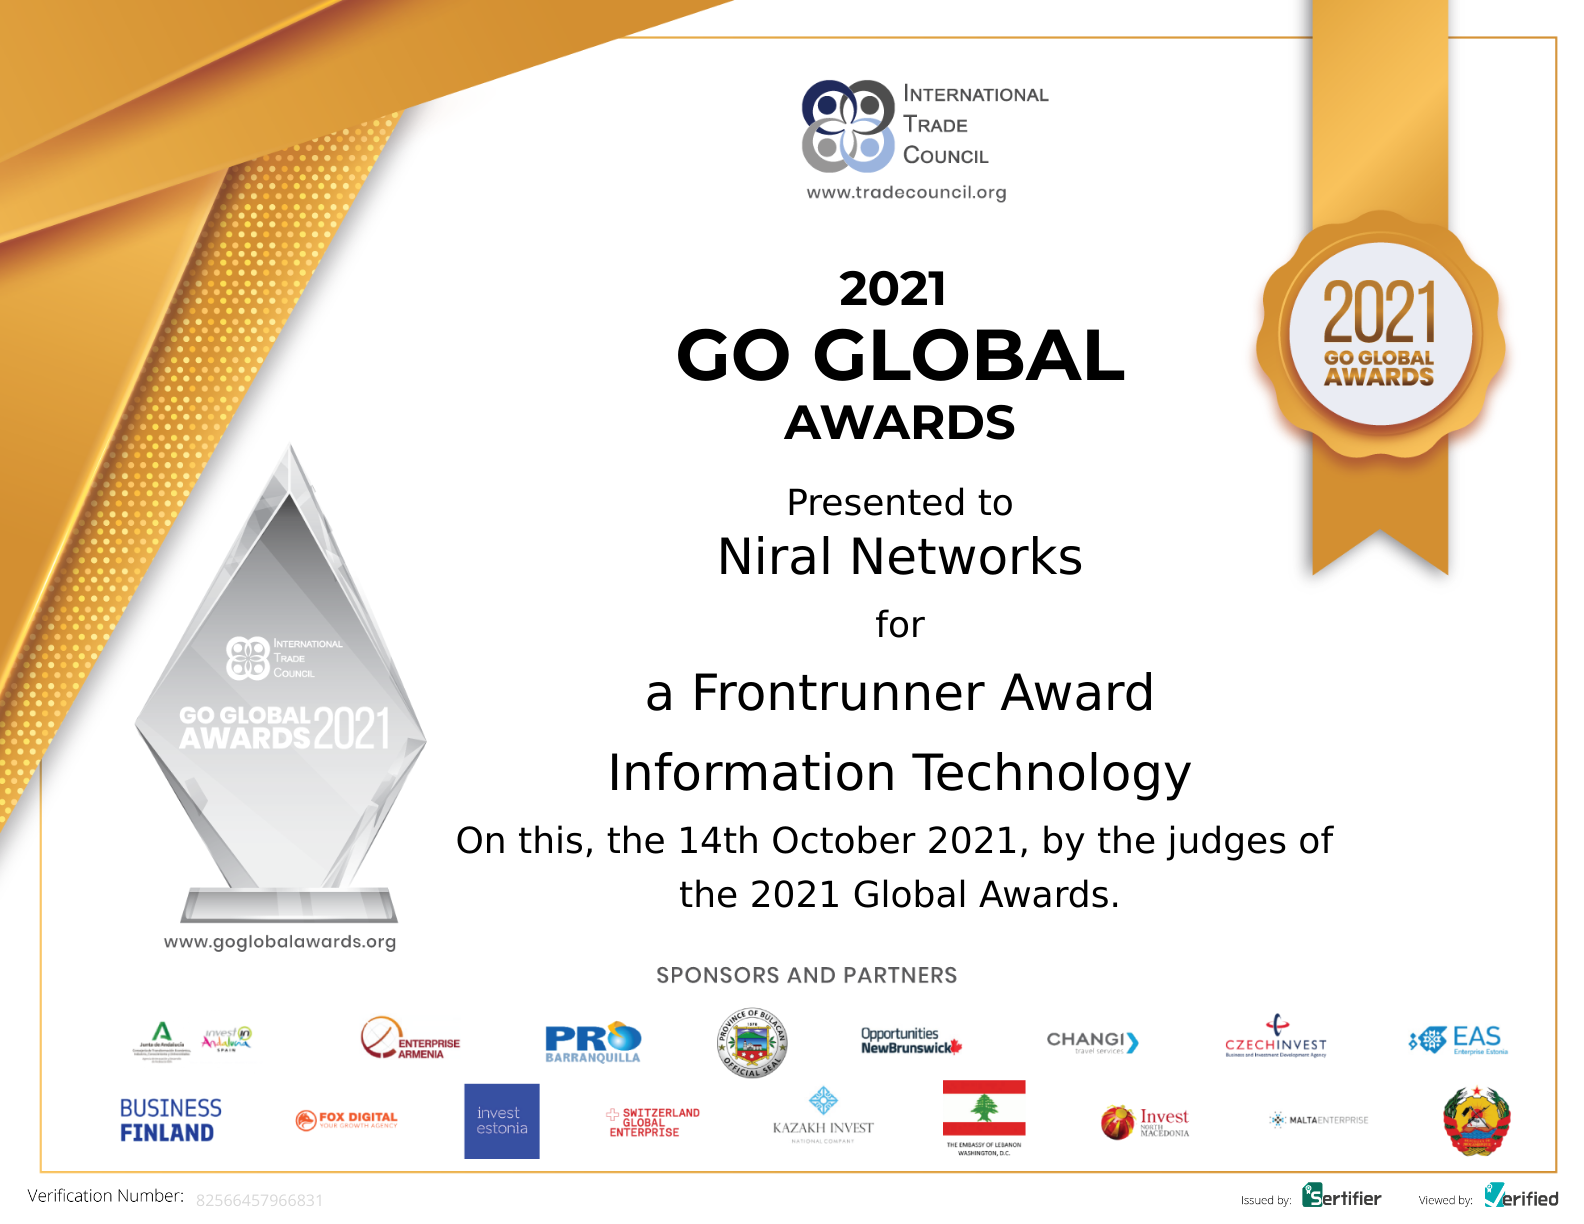 Niral Networks receives a Frontrunner Award in the category of Information Technology at the 2021 Go Global Awards.